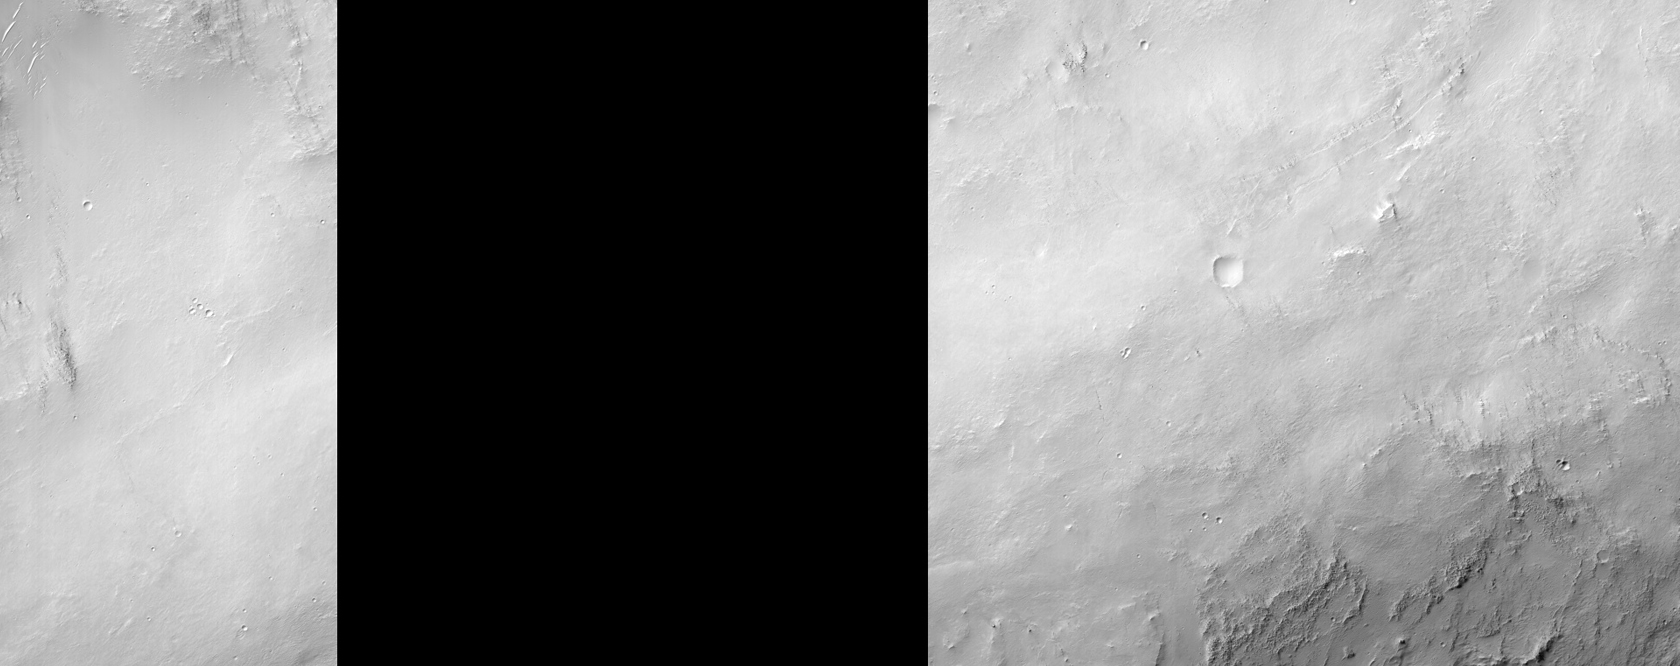 Possible Phyllosilicates in Crater Rim Near Mare Serpentis